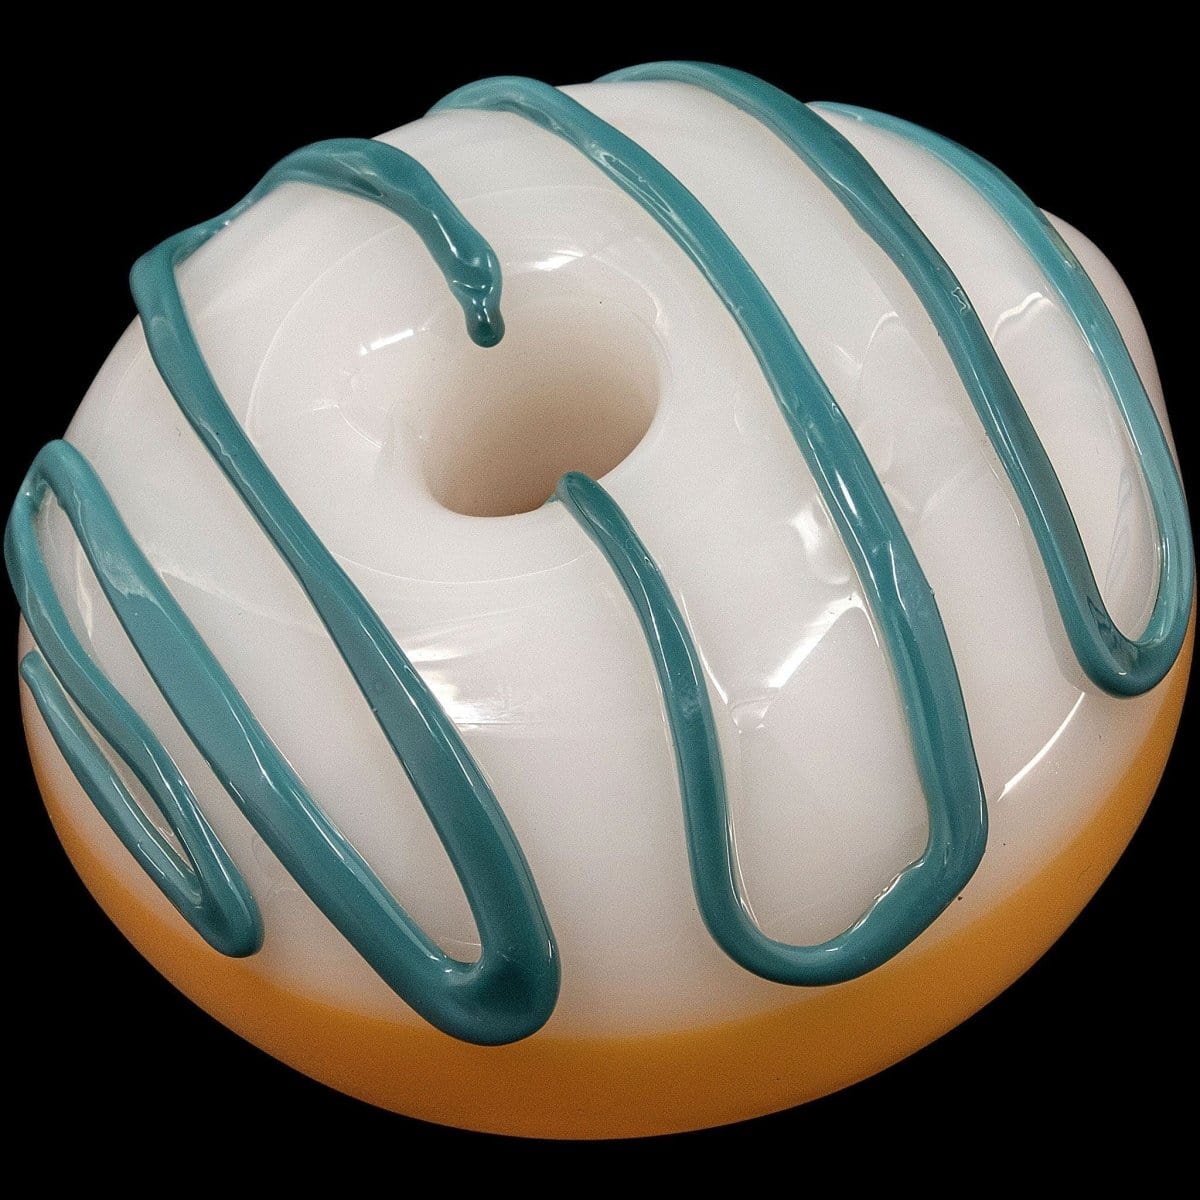 LA Pipes Hand Pipe Sour Blue Raspberry Frosting "Frosted Donut" Glass Pipe